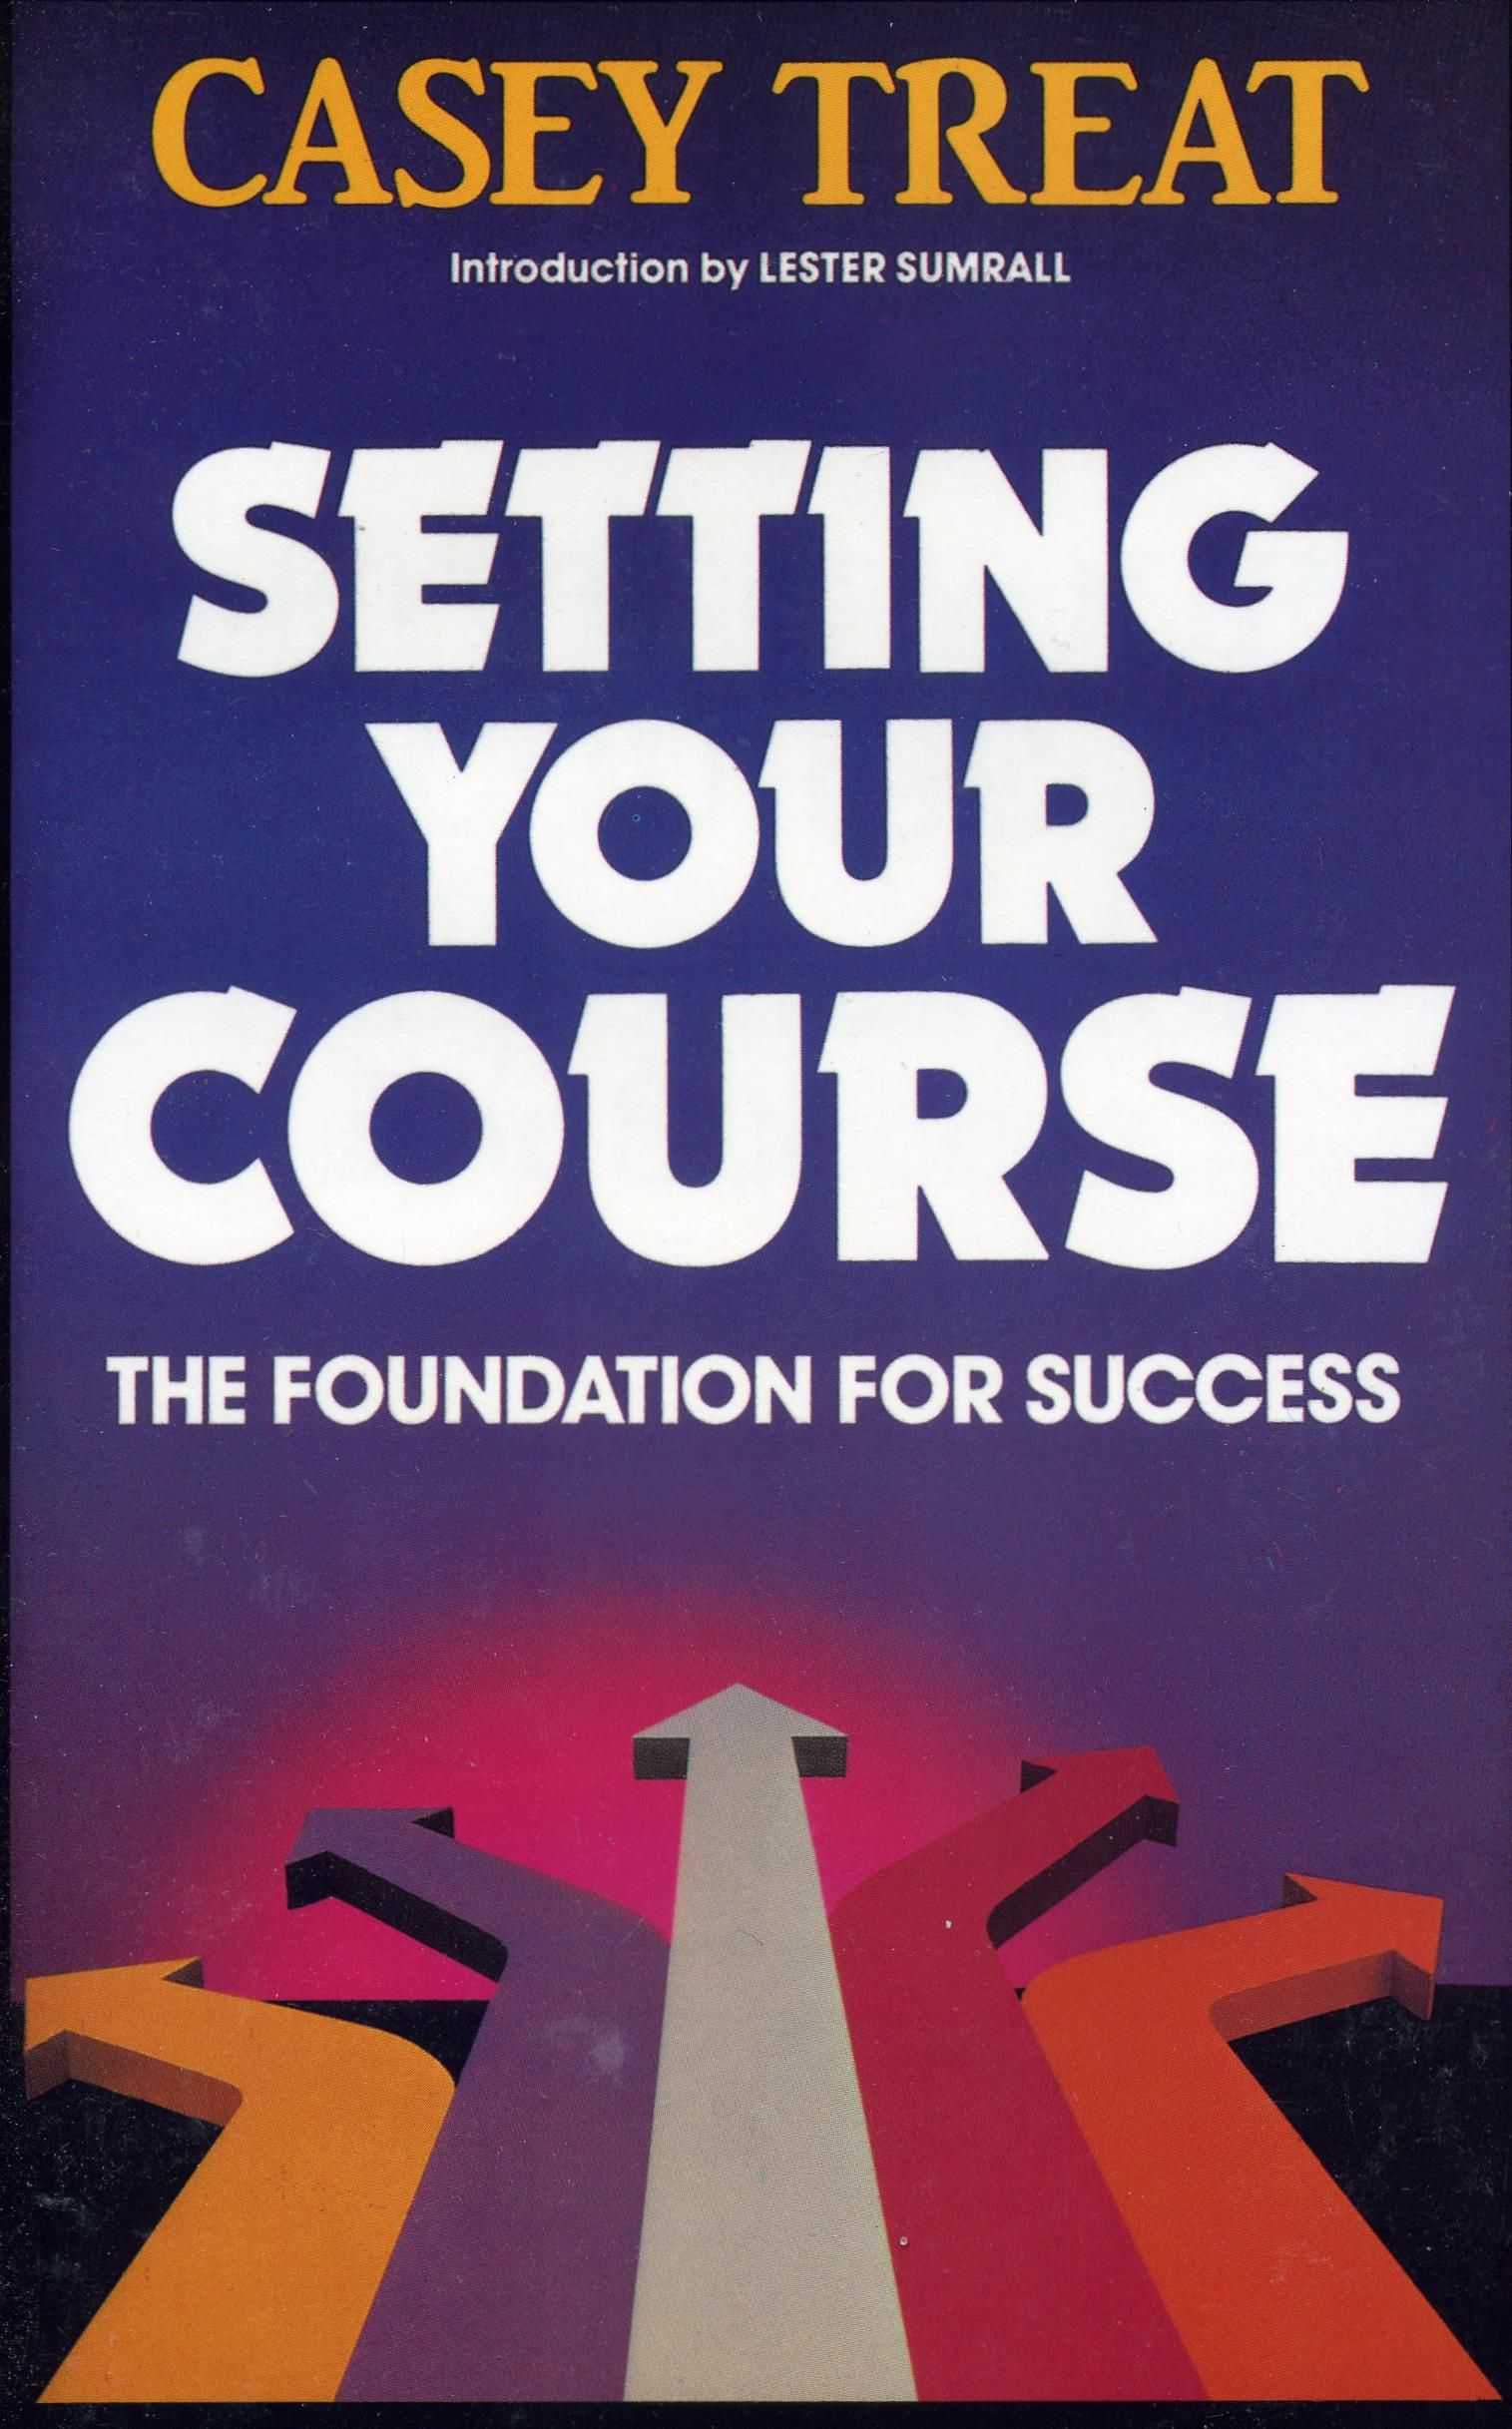 C. Treat: Setting your Course - The Foundation